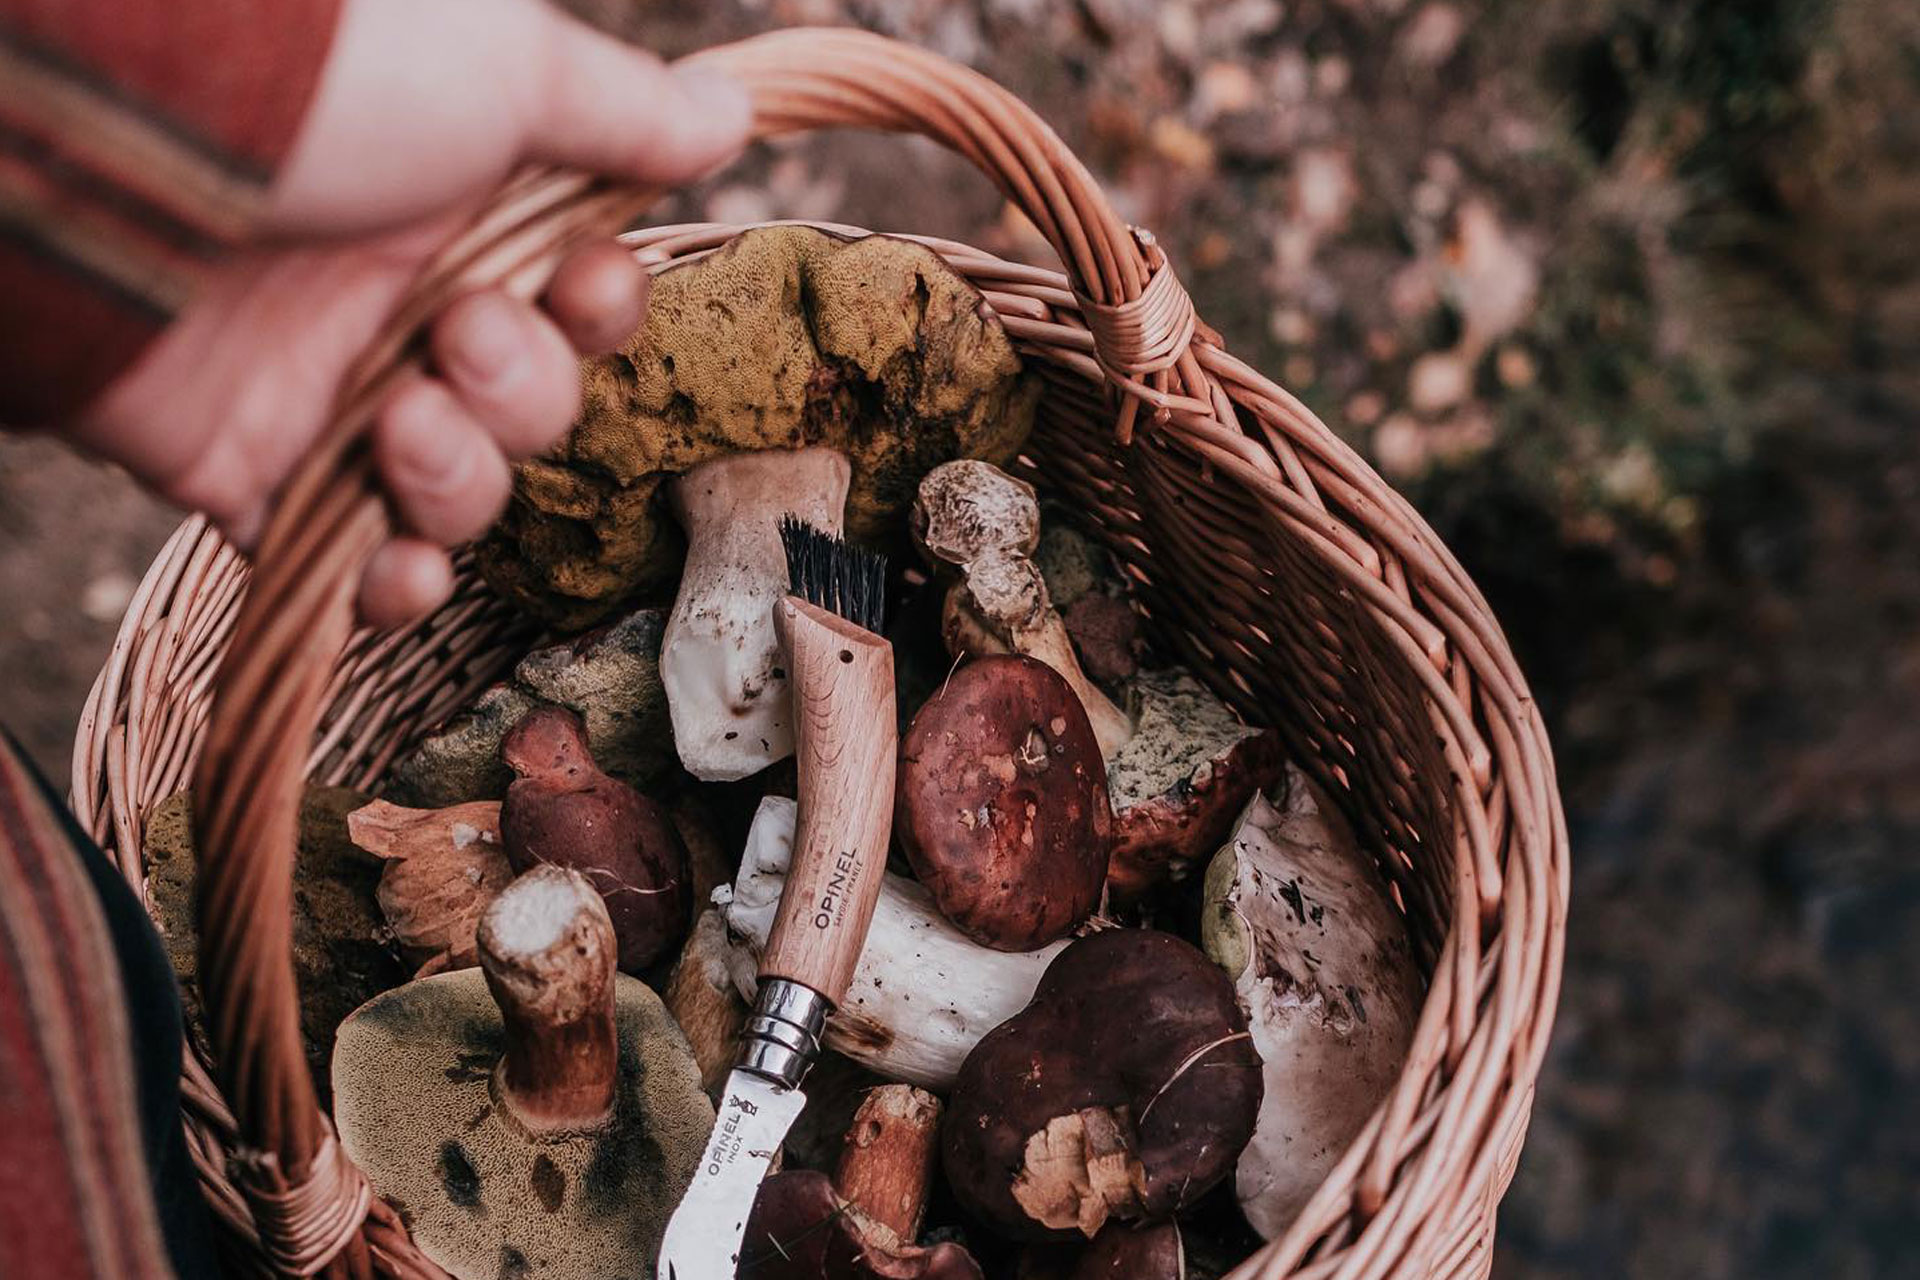 a person holds a wicker basket full of wild mushrooms